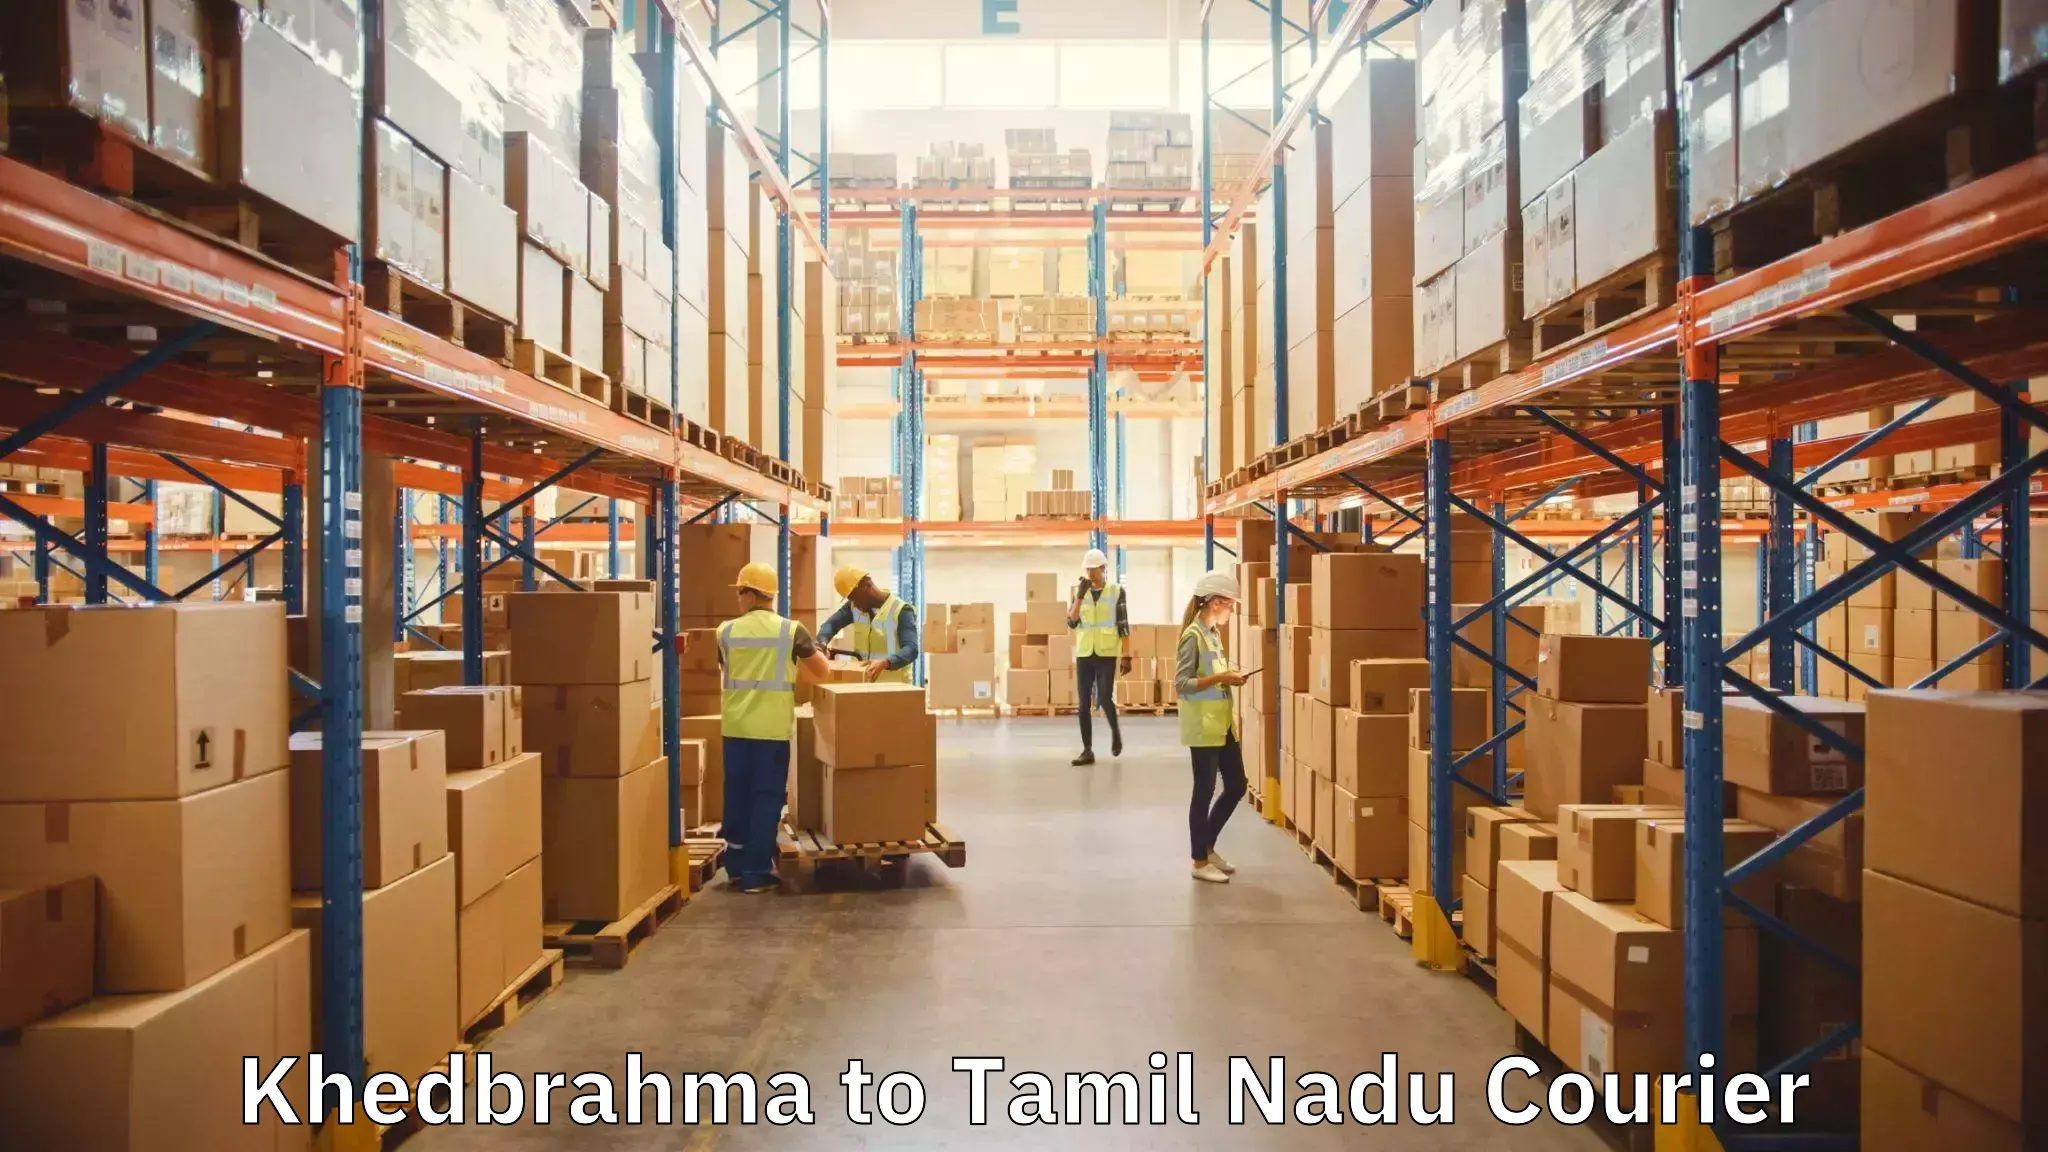 Reliable relocation services Khedbrahma to Tamil Nadu